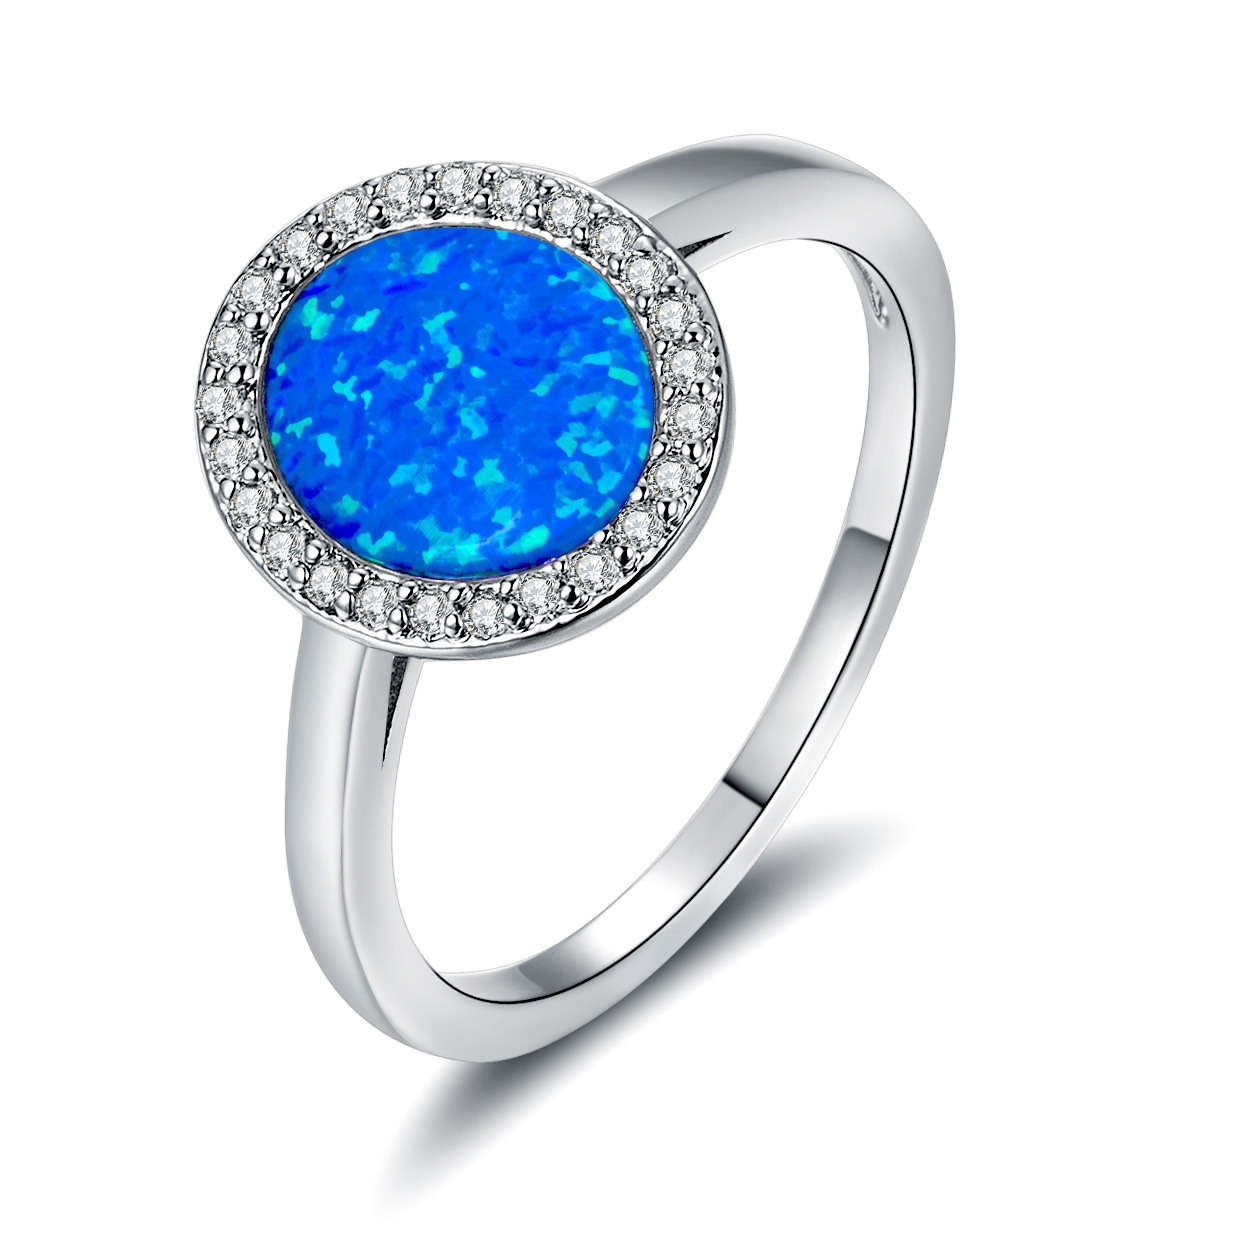 High Quality 925 Sterling Silver Blue Opal Engagement